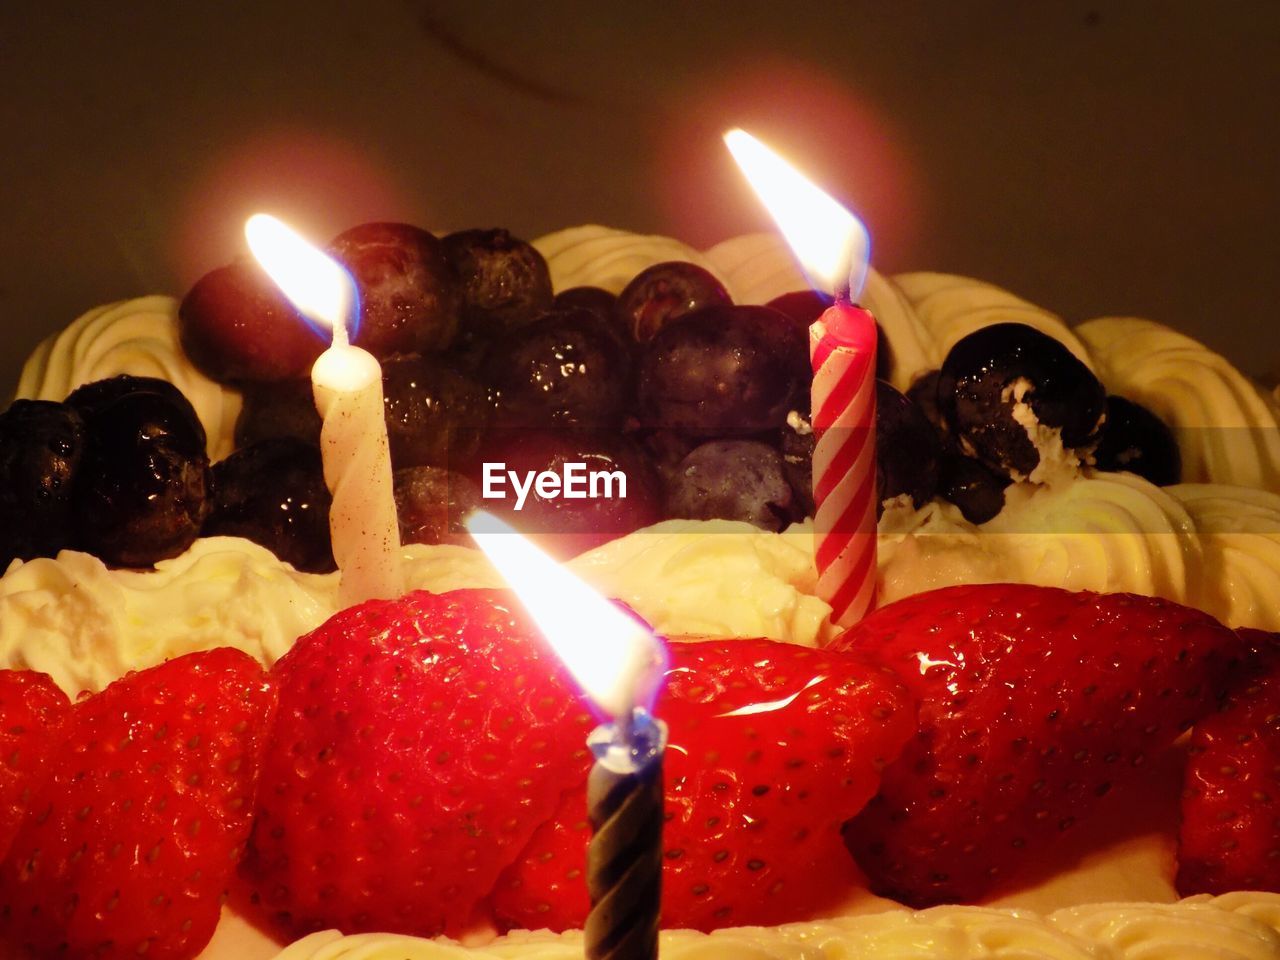 CLOSE-UP OF BIRTHDAY CAKE WITH CANDLES